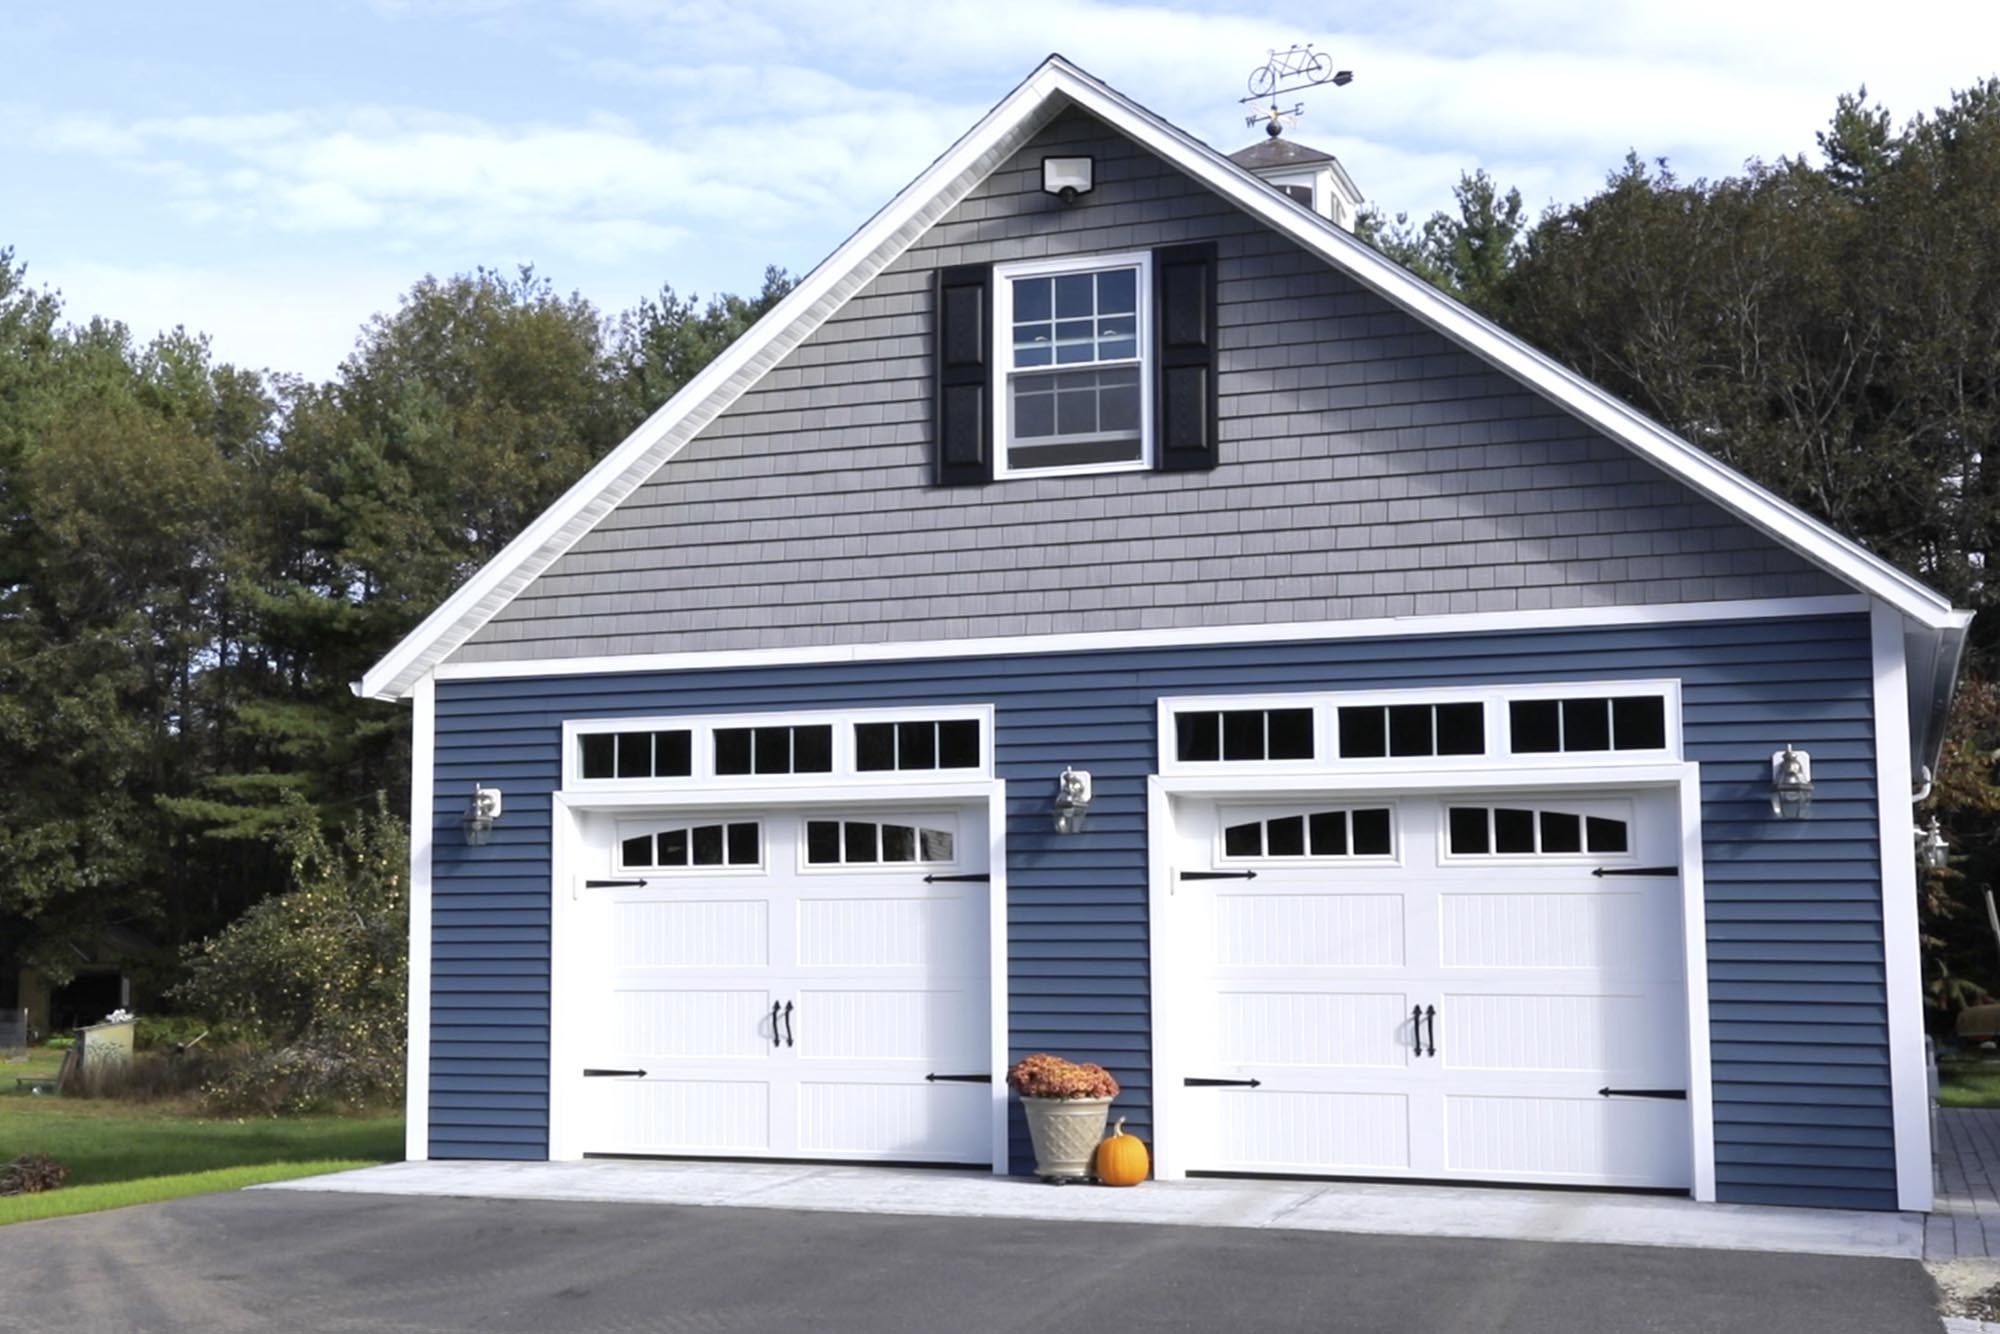 Garage or Shed – Which Is Right for You?